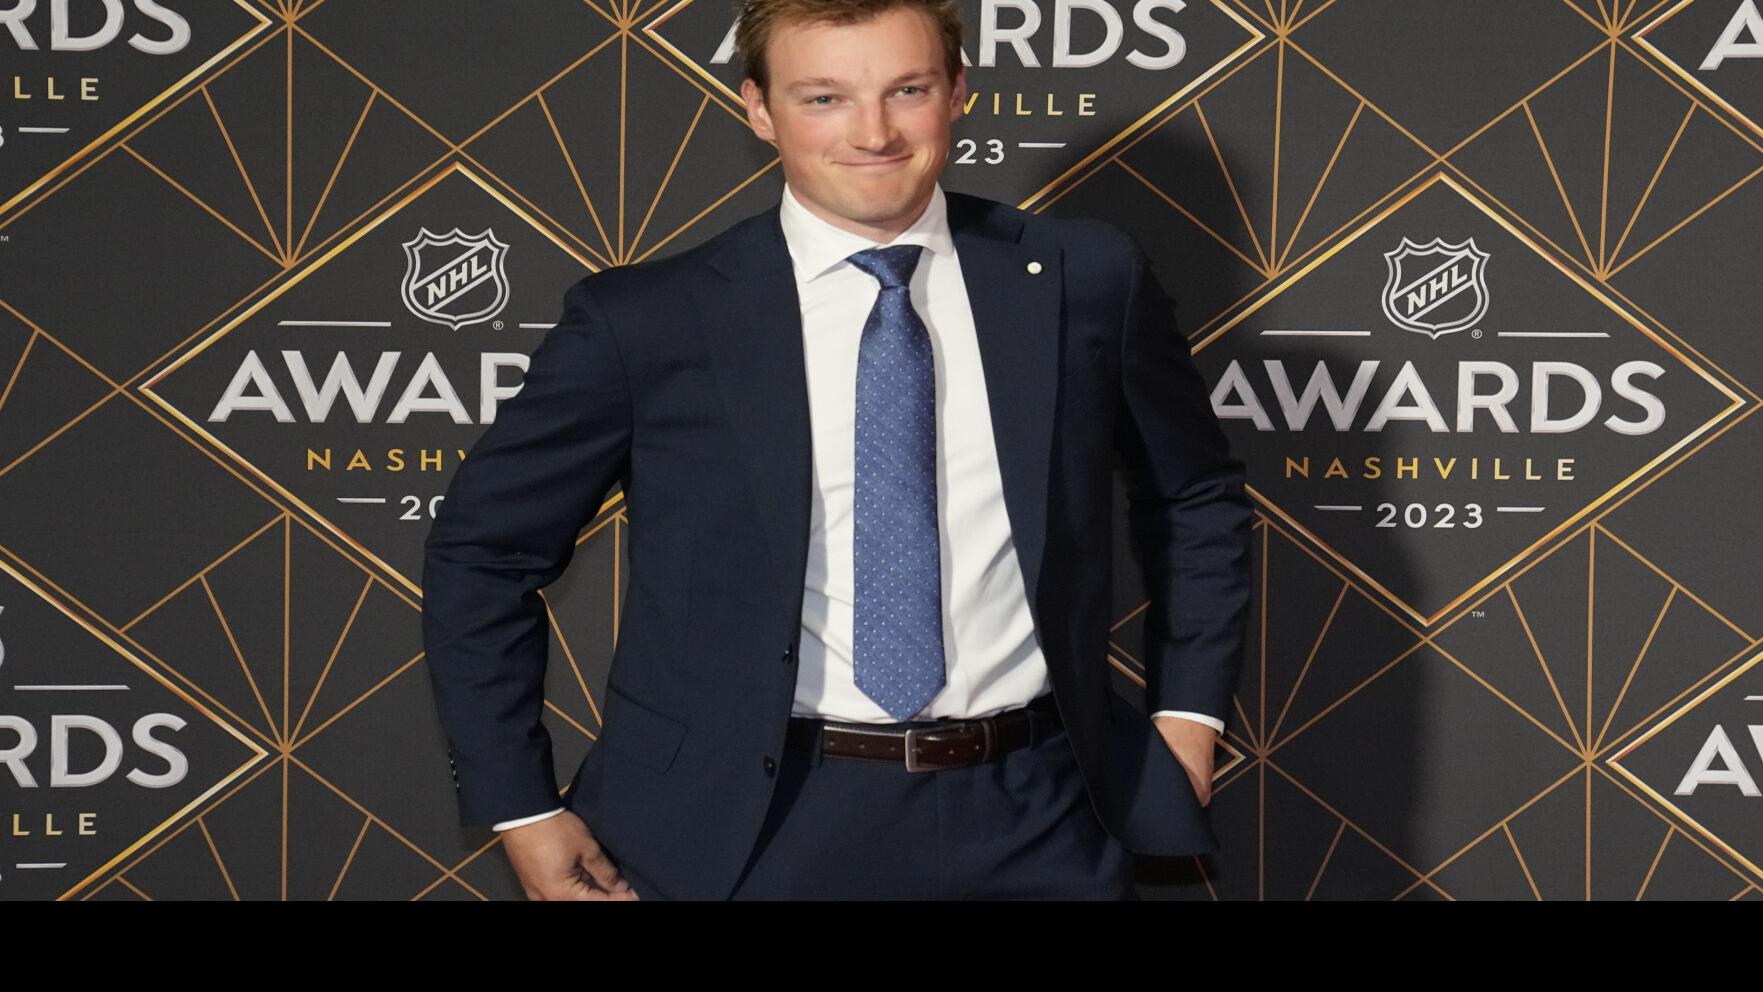 It's Cale Makar! Avalanche Defenseman Will Be NHL 24 Cover Athlete